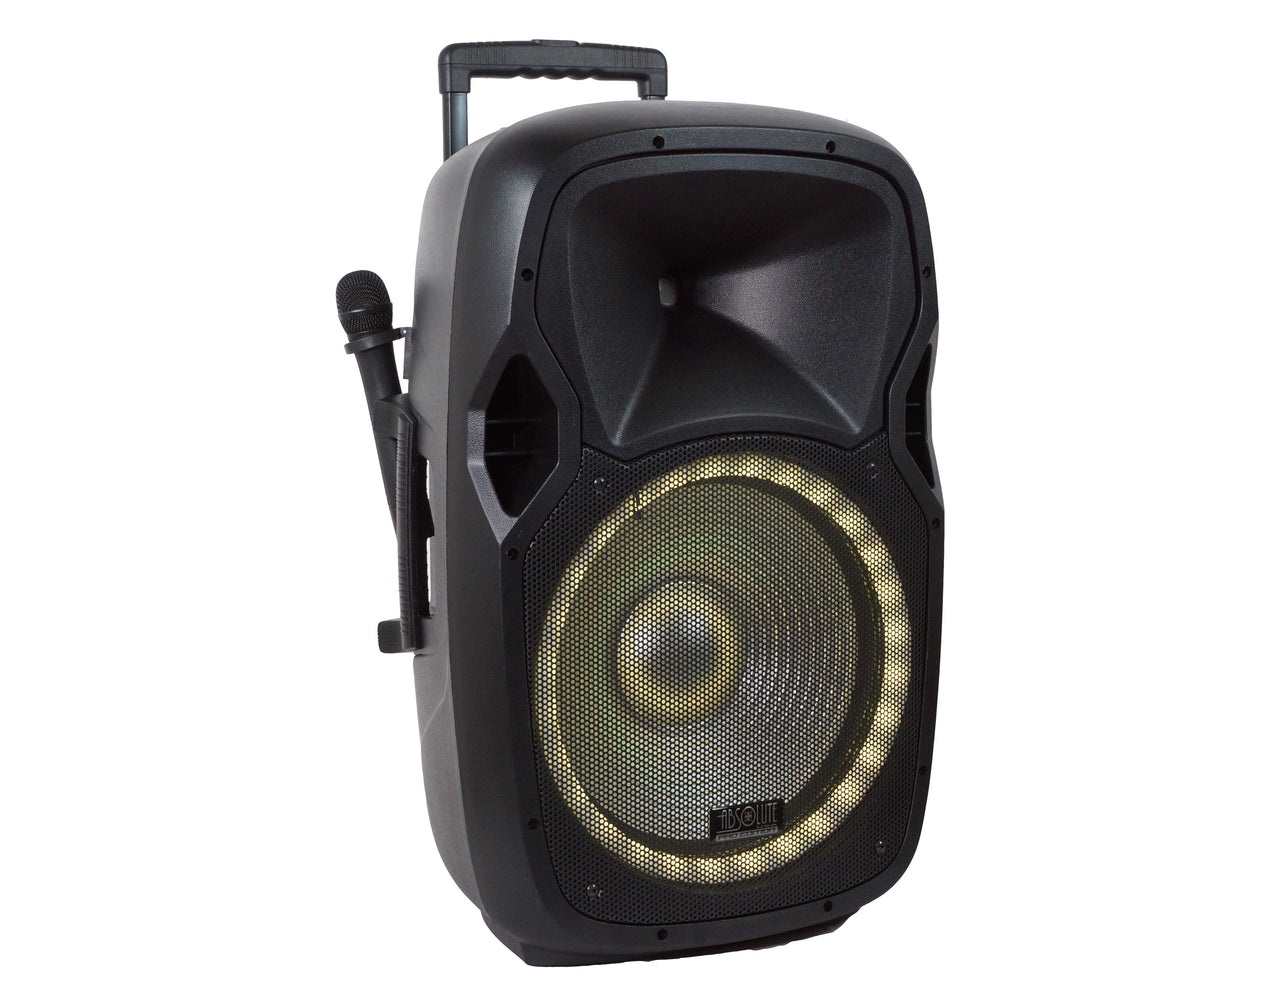 Absolute USA USPROBAT15 15" Wireless Portable PA Speaker System 3500W High Powered Bluetooth Indoor and Outdoor DJ PA Sound Stereo Loudspeaker USB SD MP3 AUX Input Flashing Party Light & FM Radio